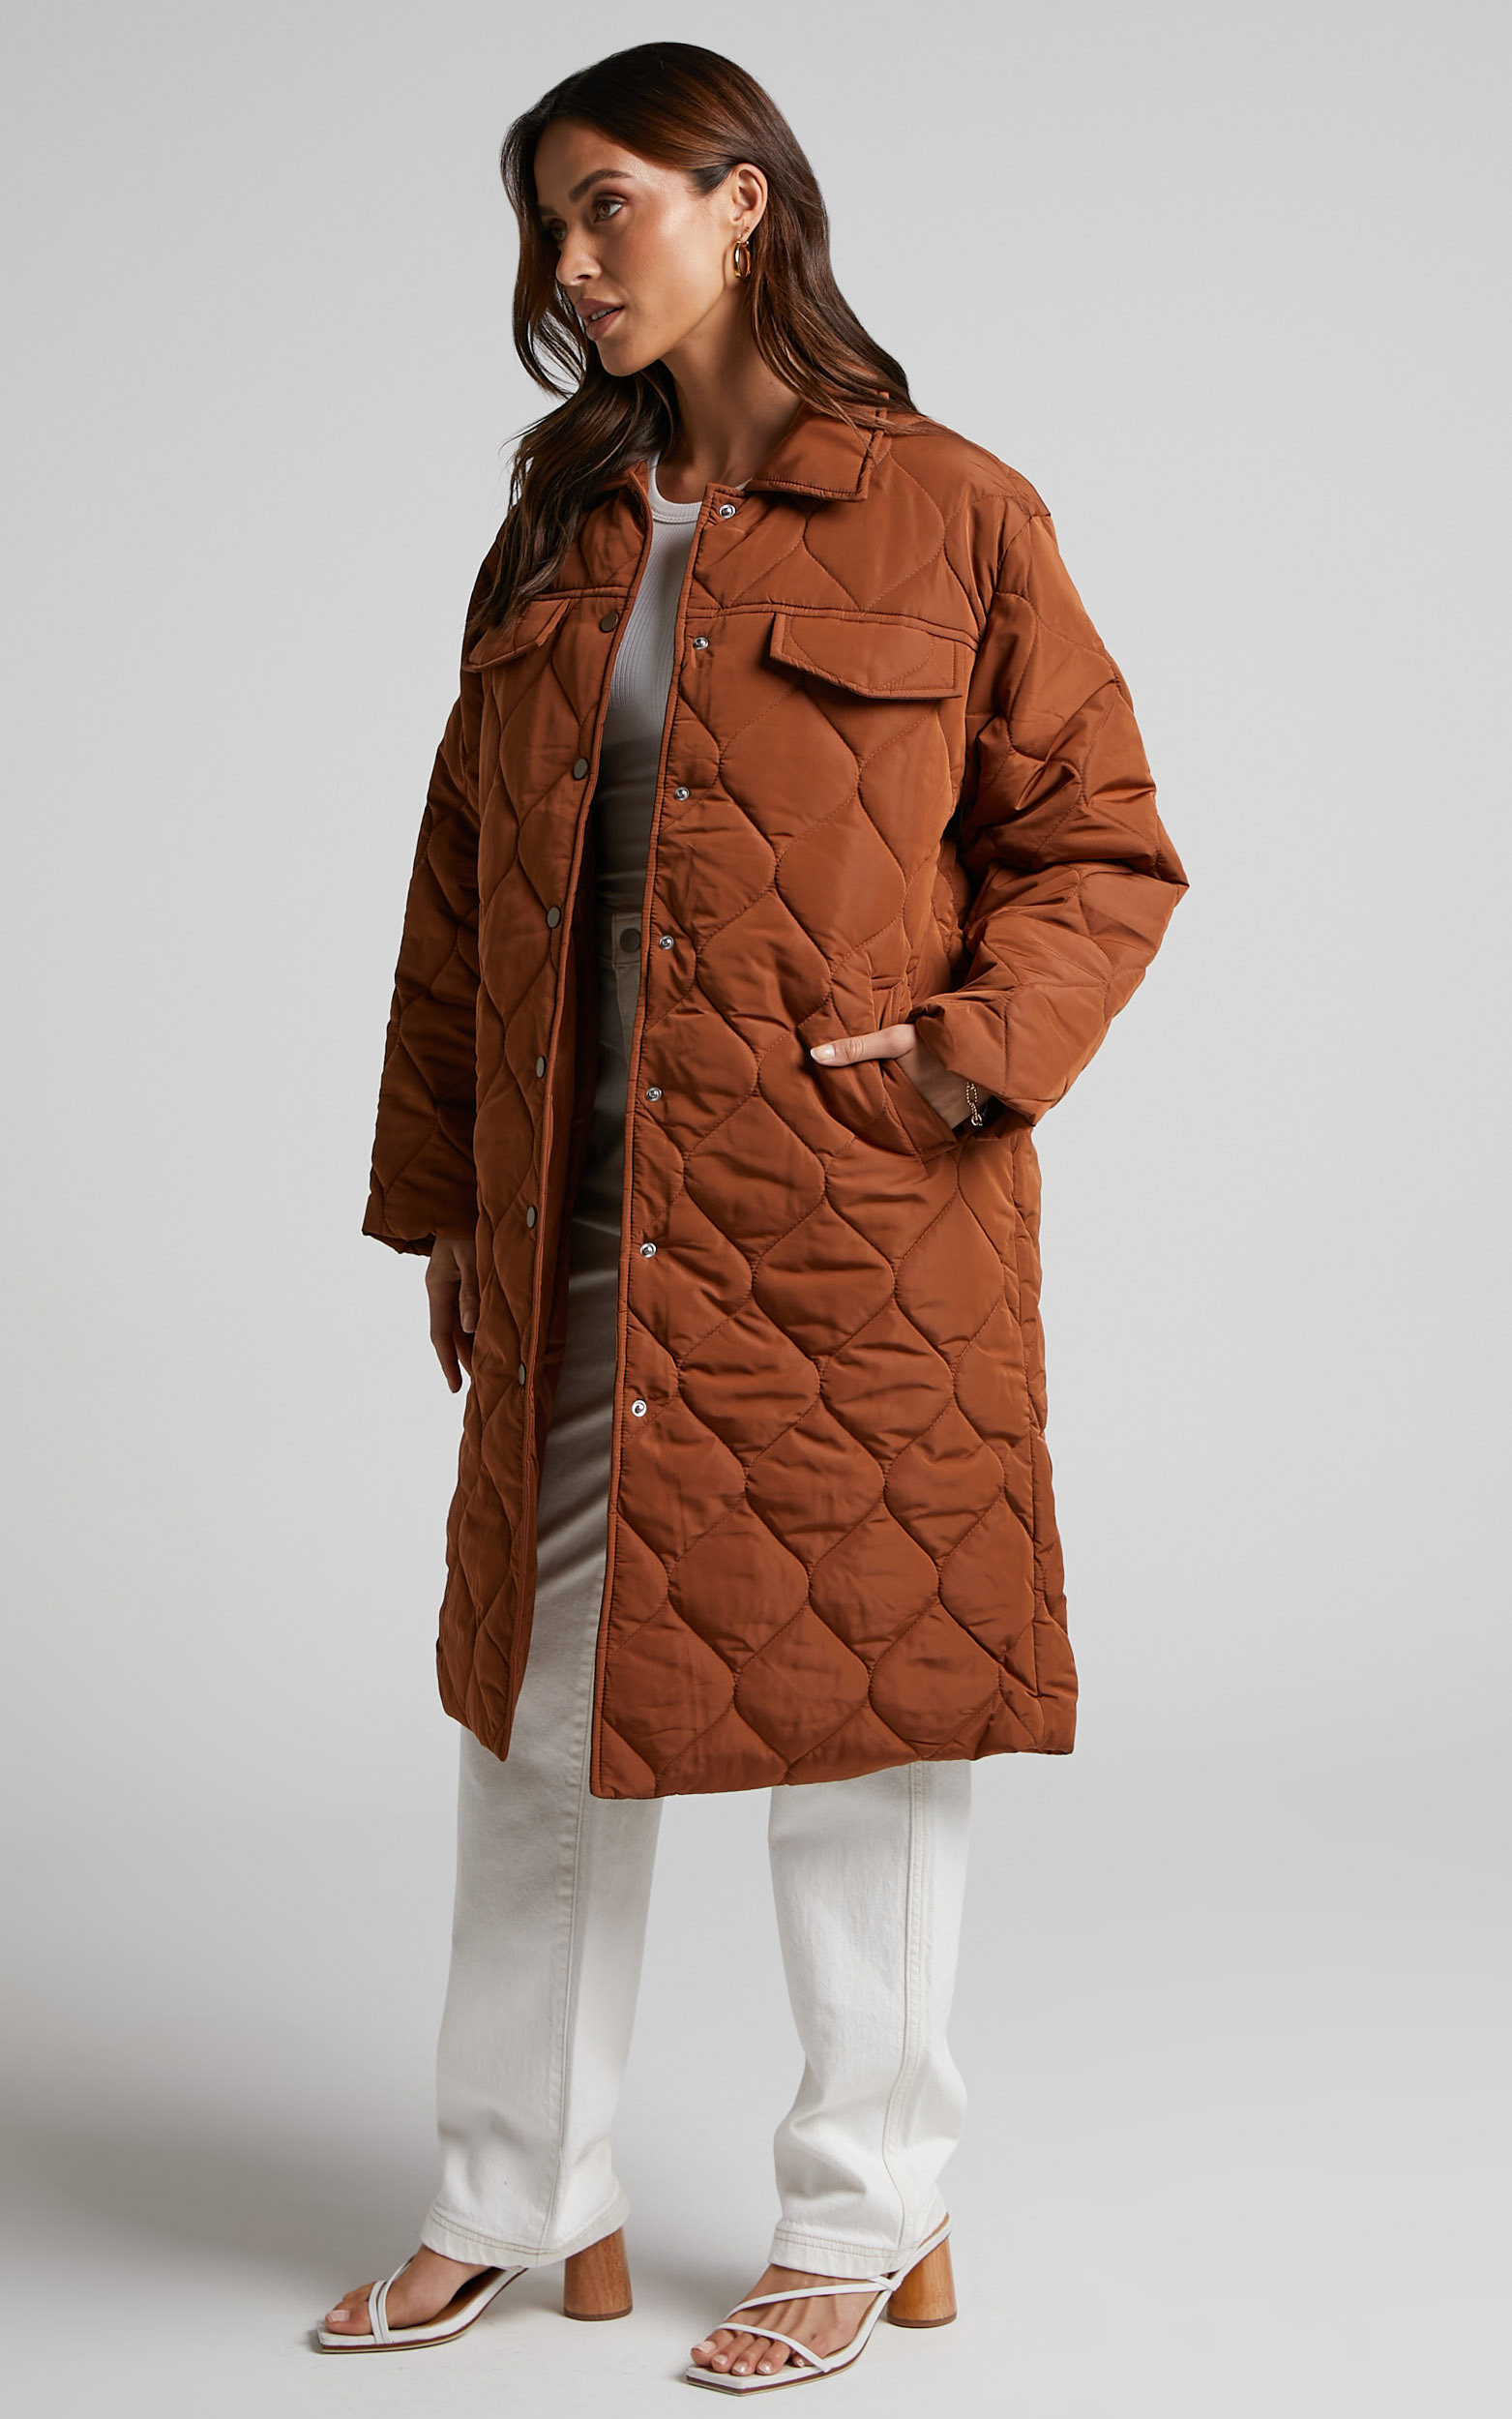 Bayley Coat - Longline Quilted Coat in Chocolate - L, BRN1, hi-res image number null